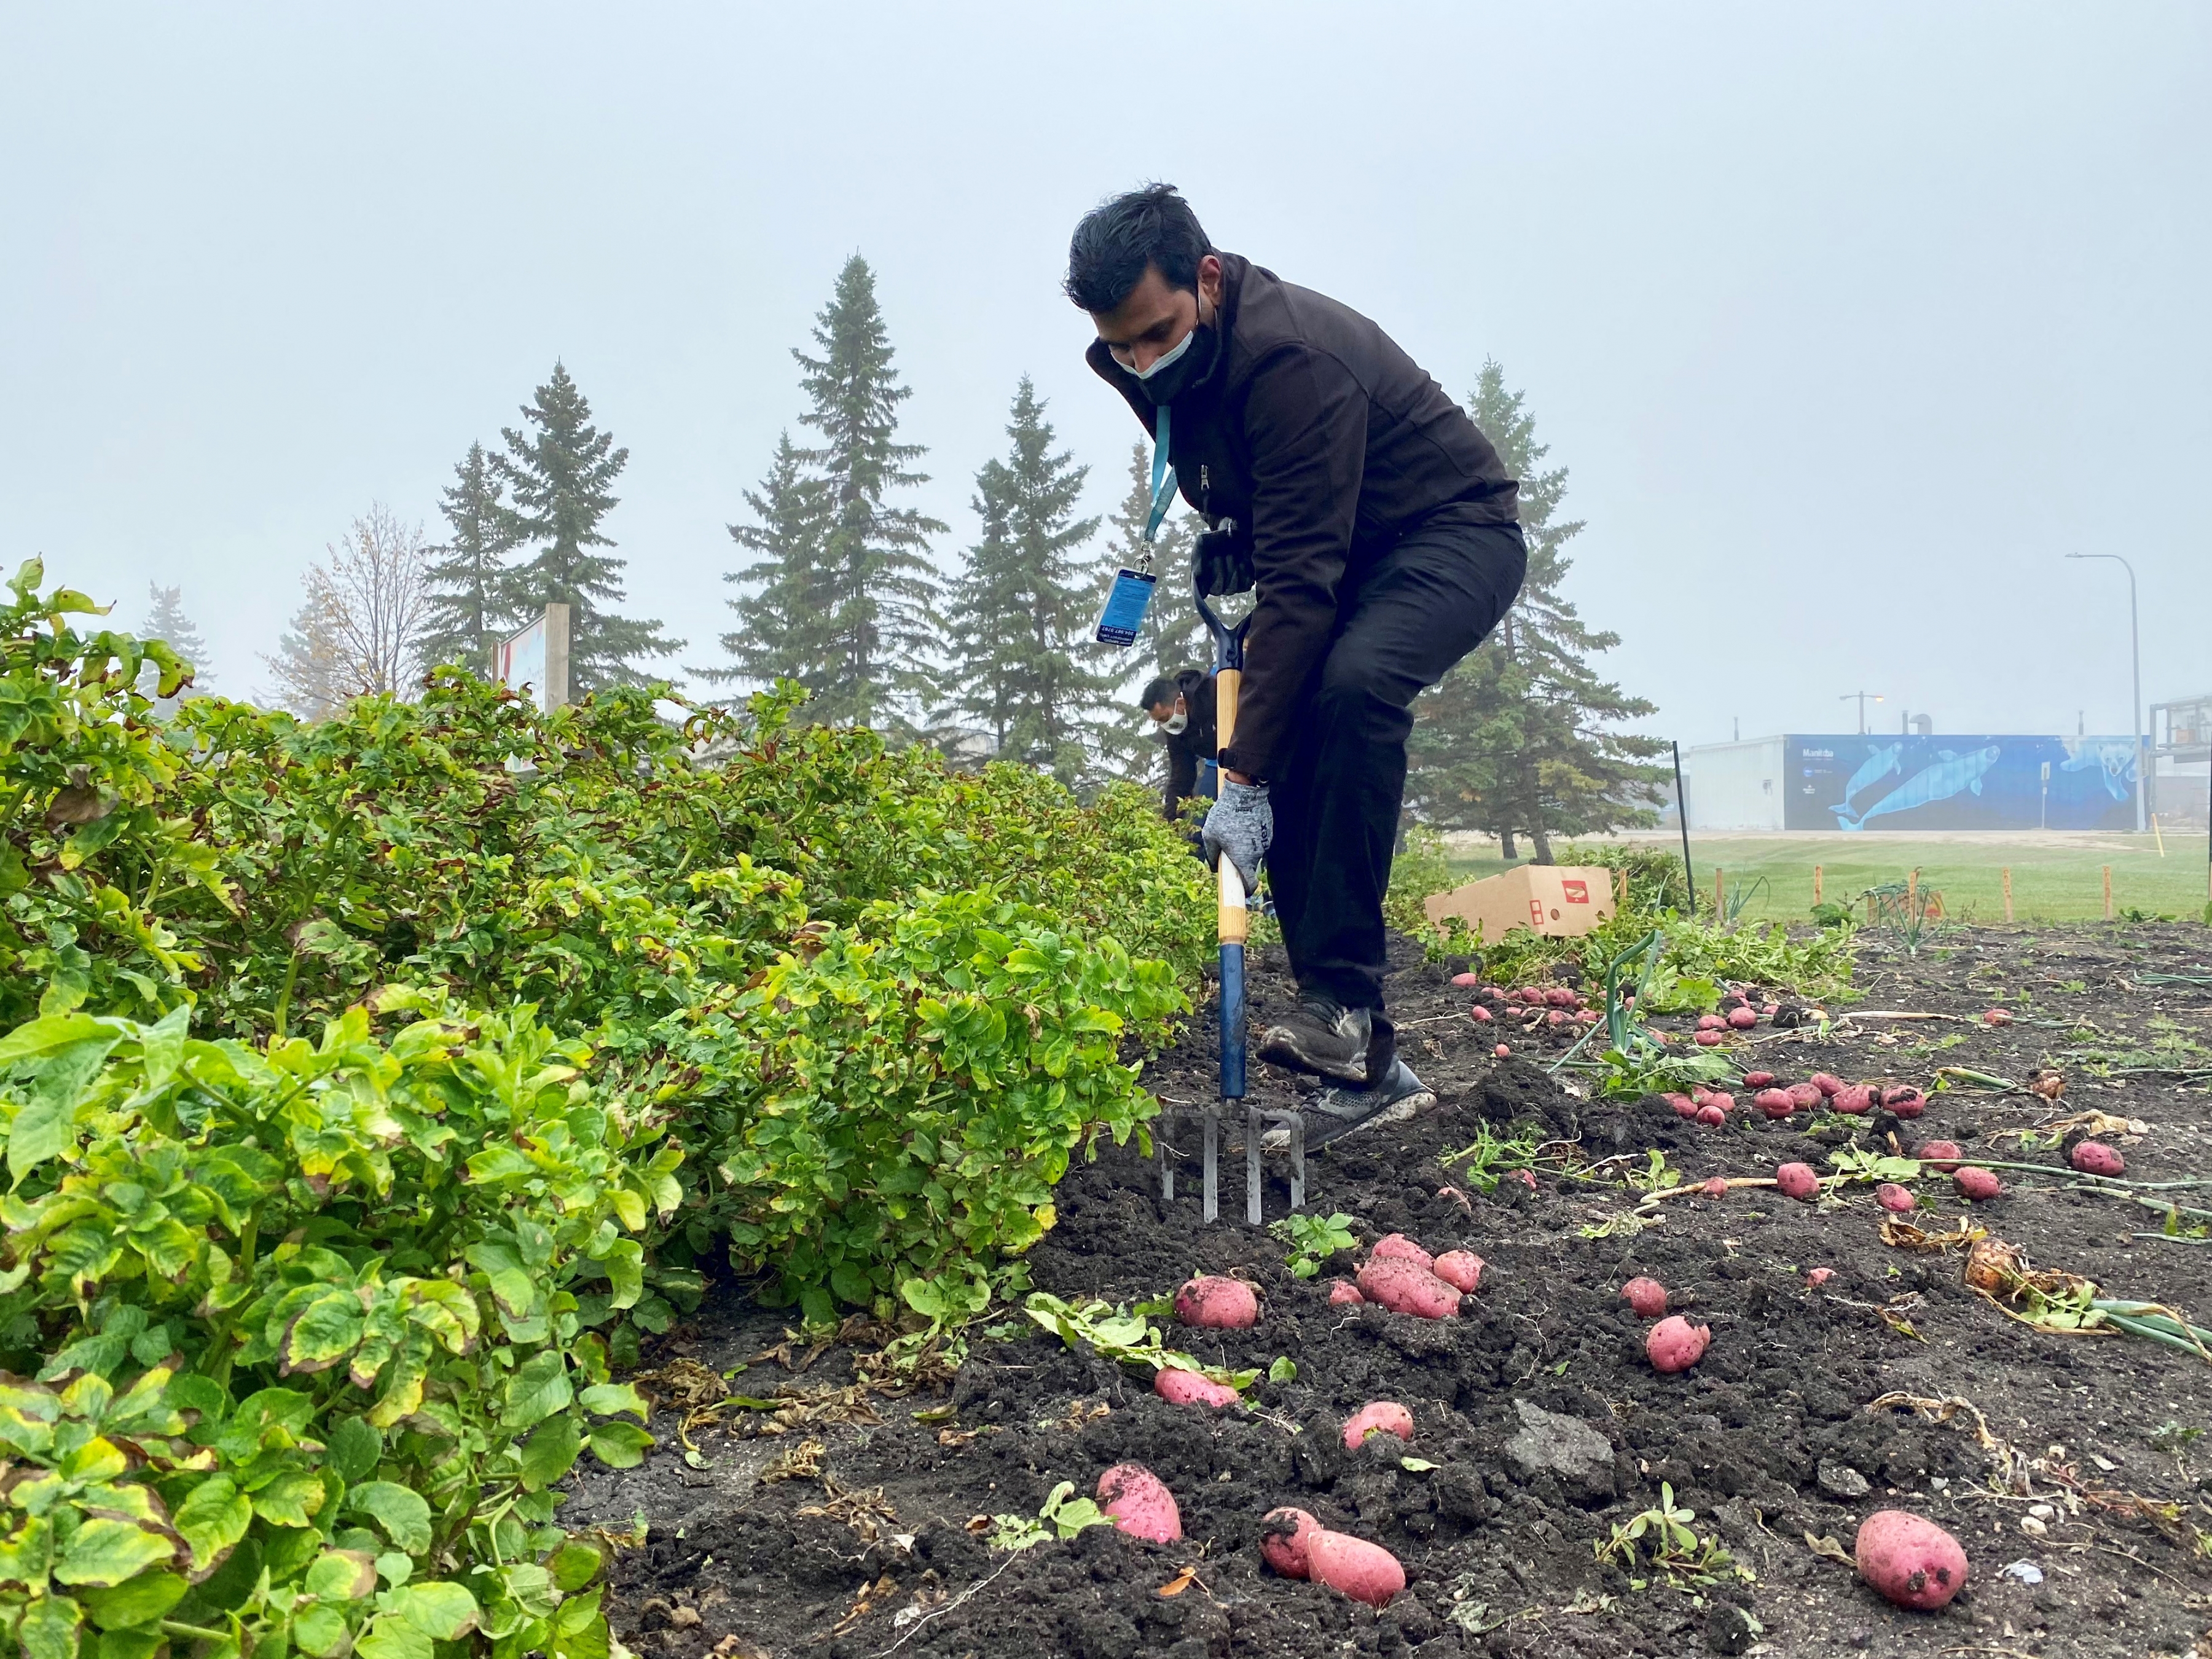 A Winnipeg Airports Authority employee harvests potatoes from the airport Harvest Garden.